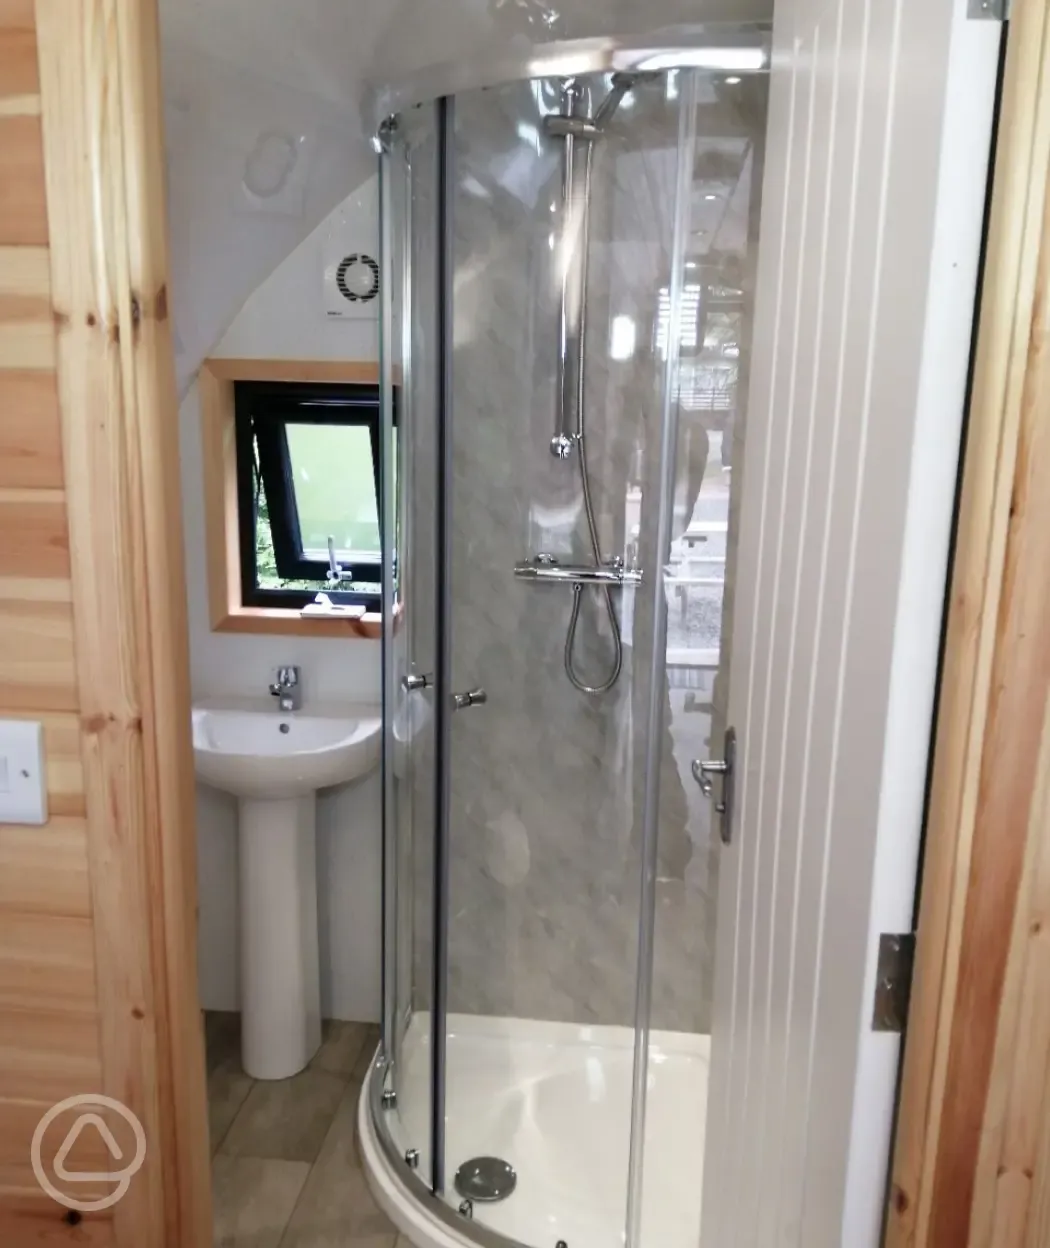 Ensuite pod with hot tub facilities